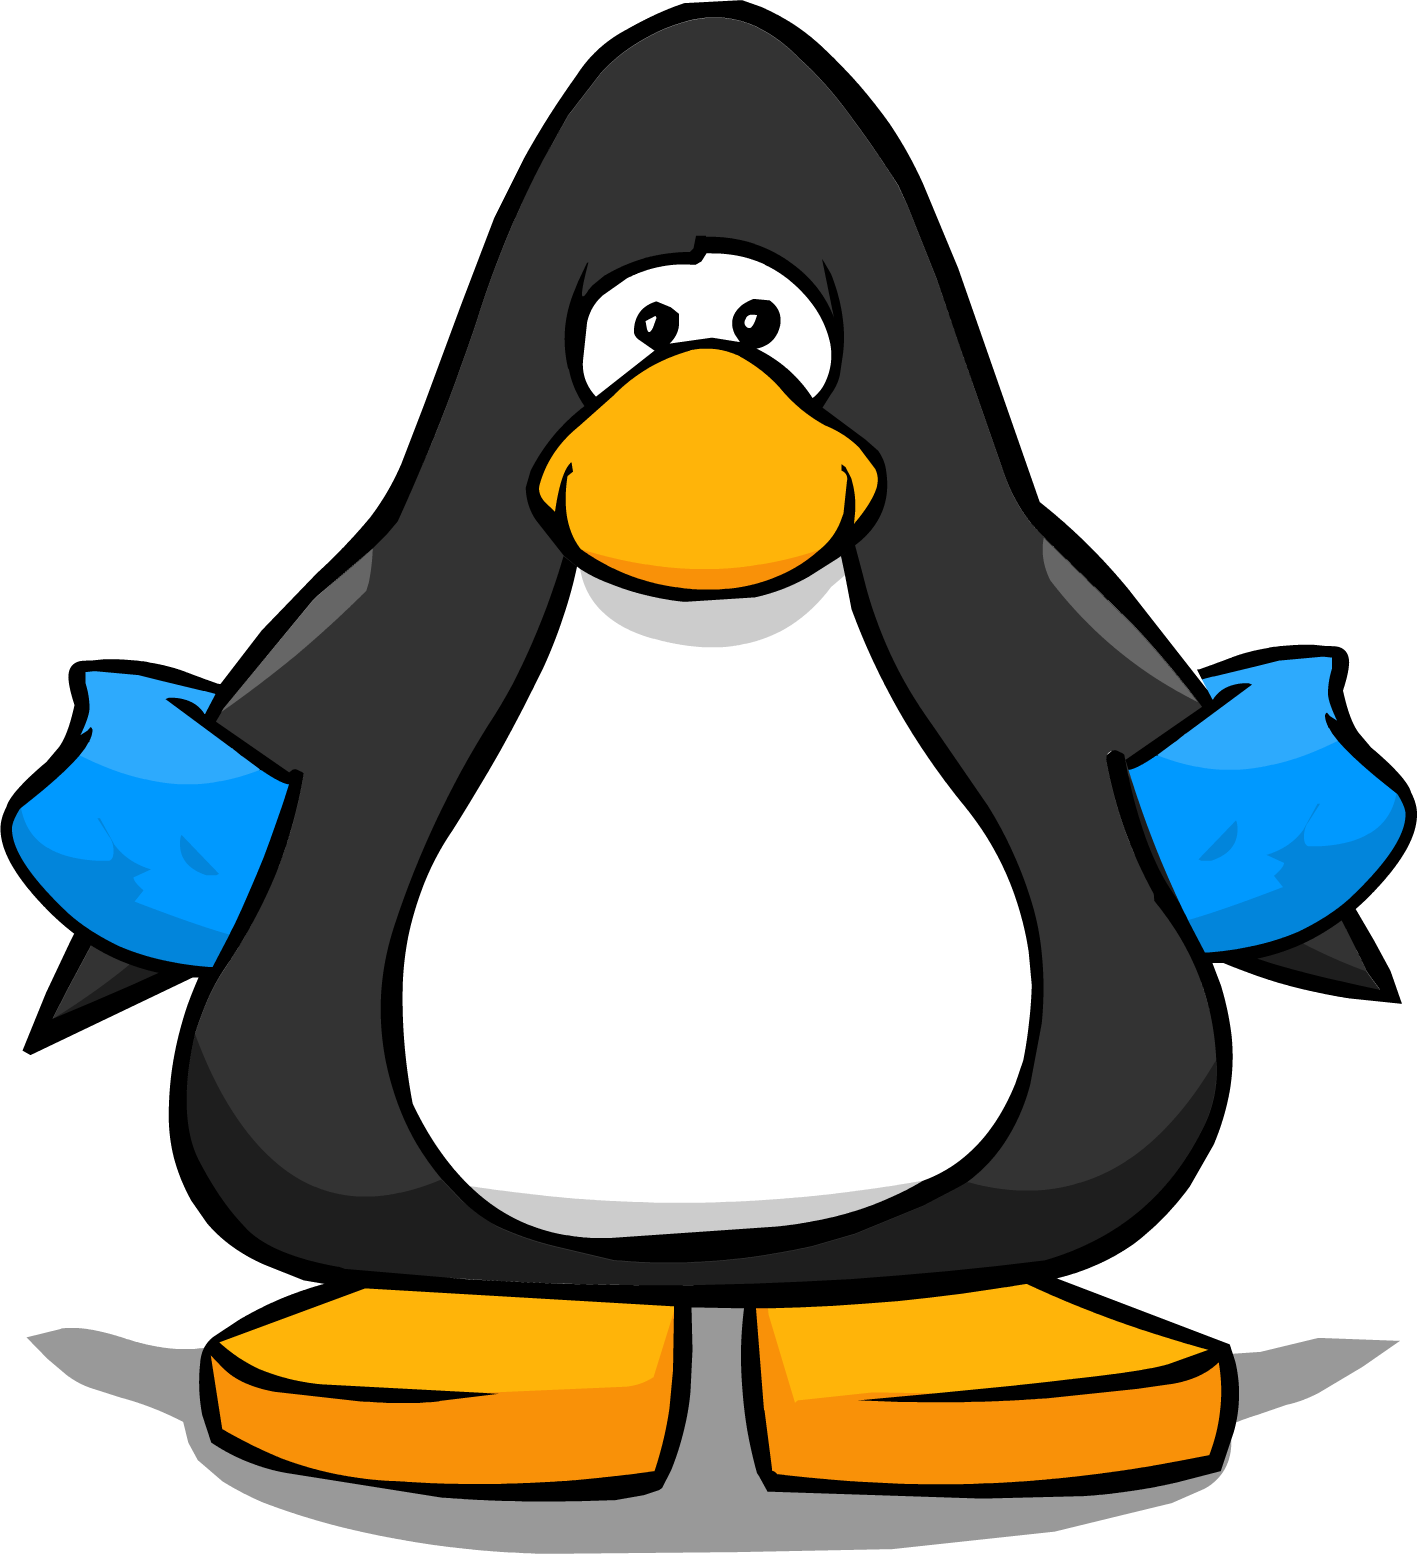 Blue Water Wings From A Player Card - Club Penguin 3d Glasses (1417x1554)